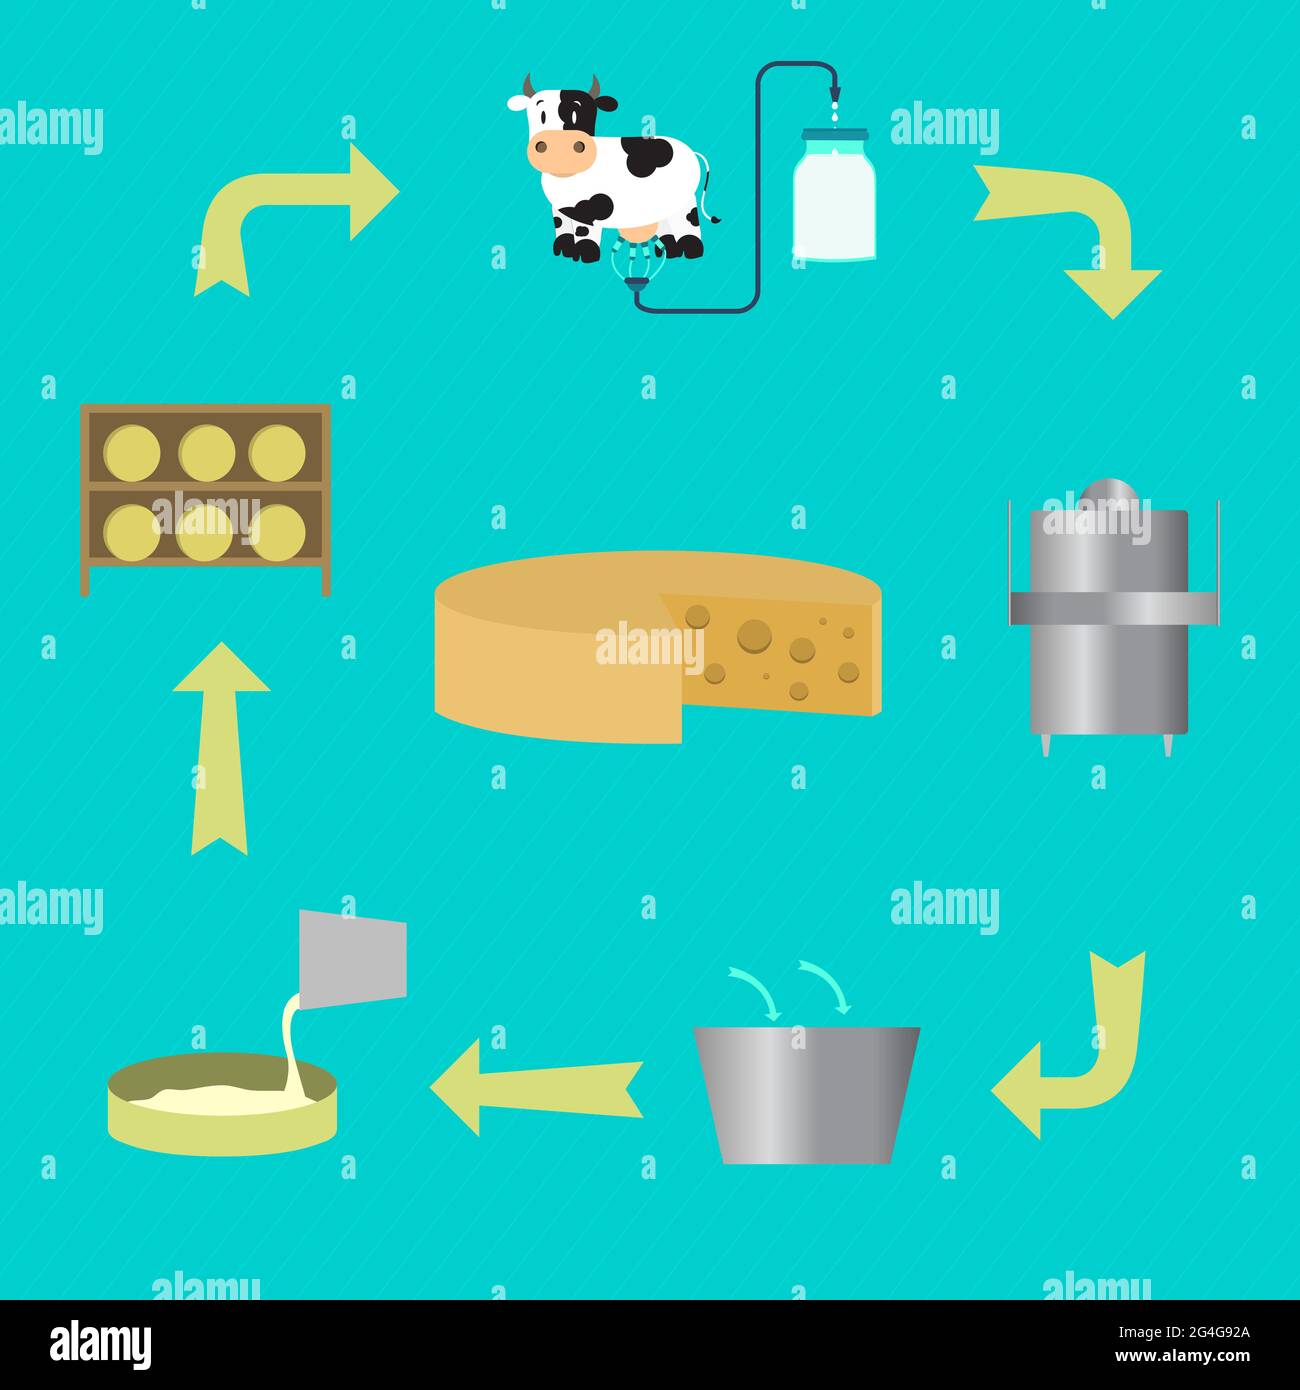 Scheme showing the process of making cheese. From milking the cow to the process of pasteurization and maturing cheese. Stock Vector